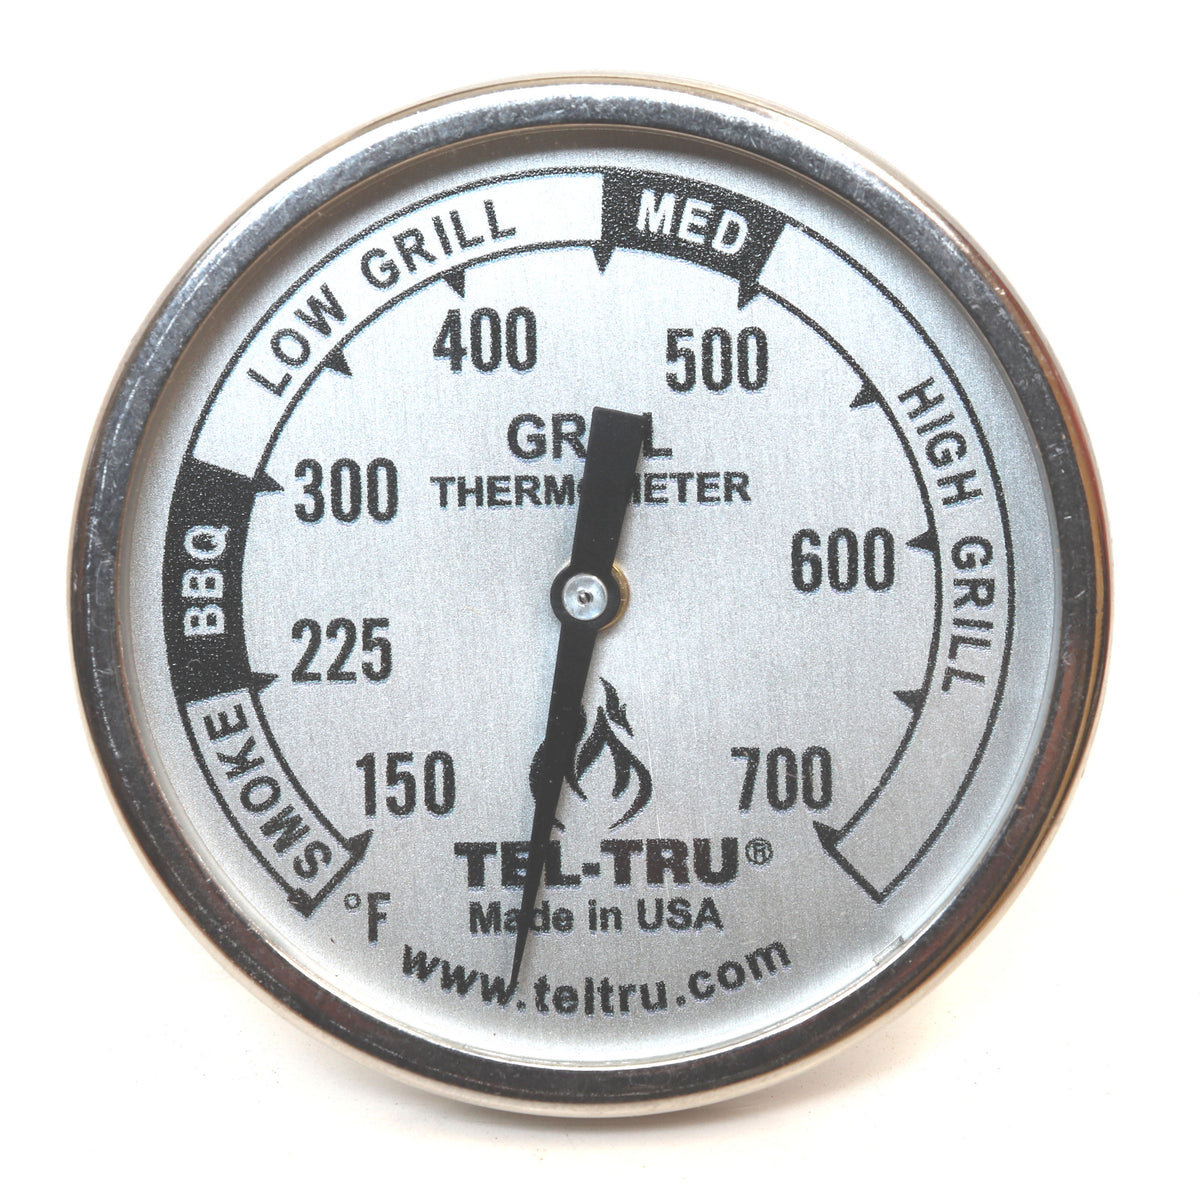 Tel-Tru BQ225 Barbecue Pit Thermometer, 2 inch Dial and 2-1/2 inch Stem